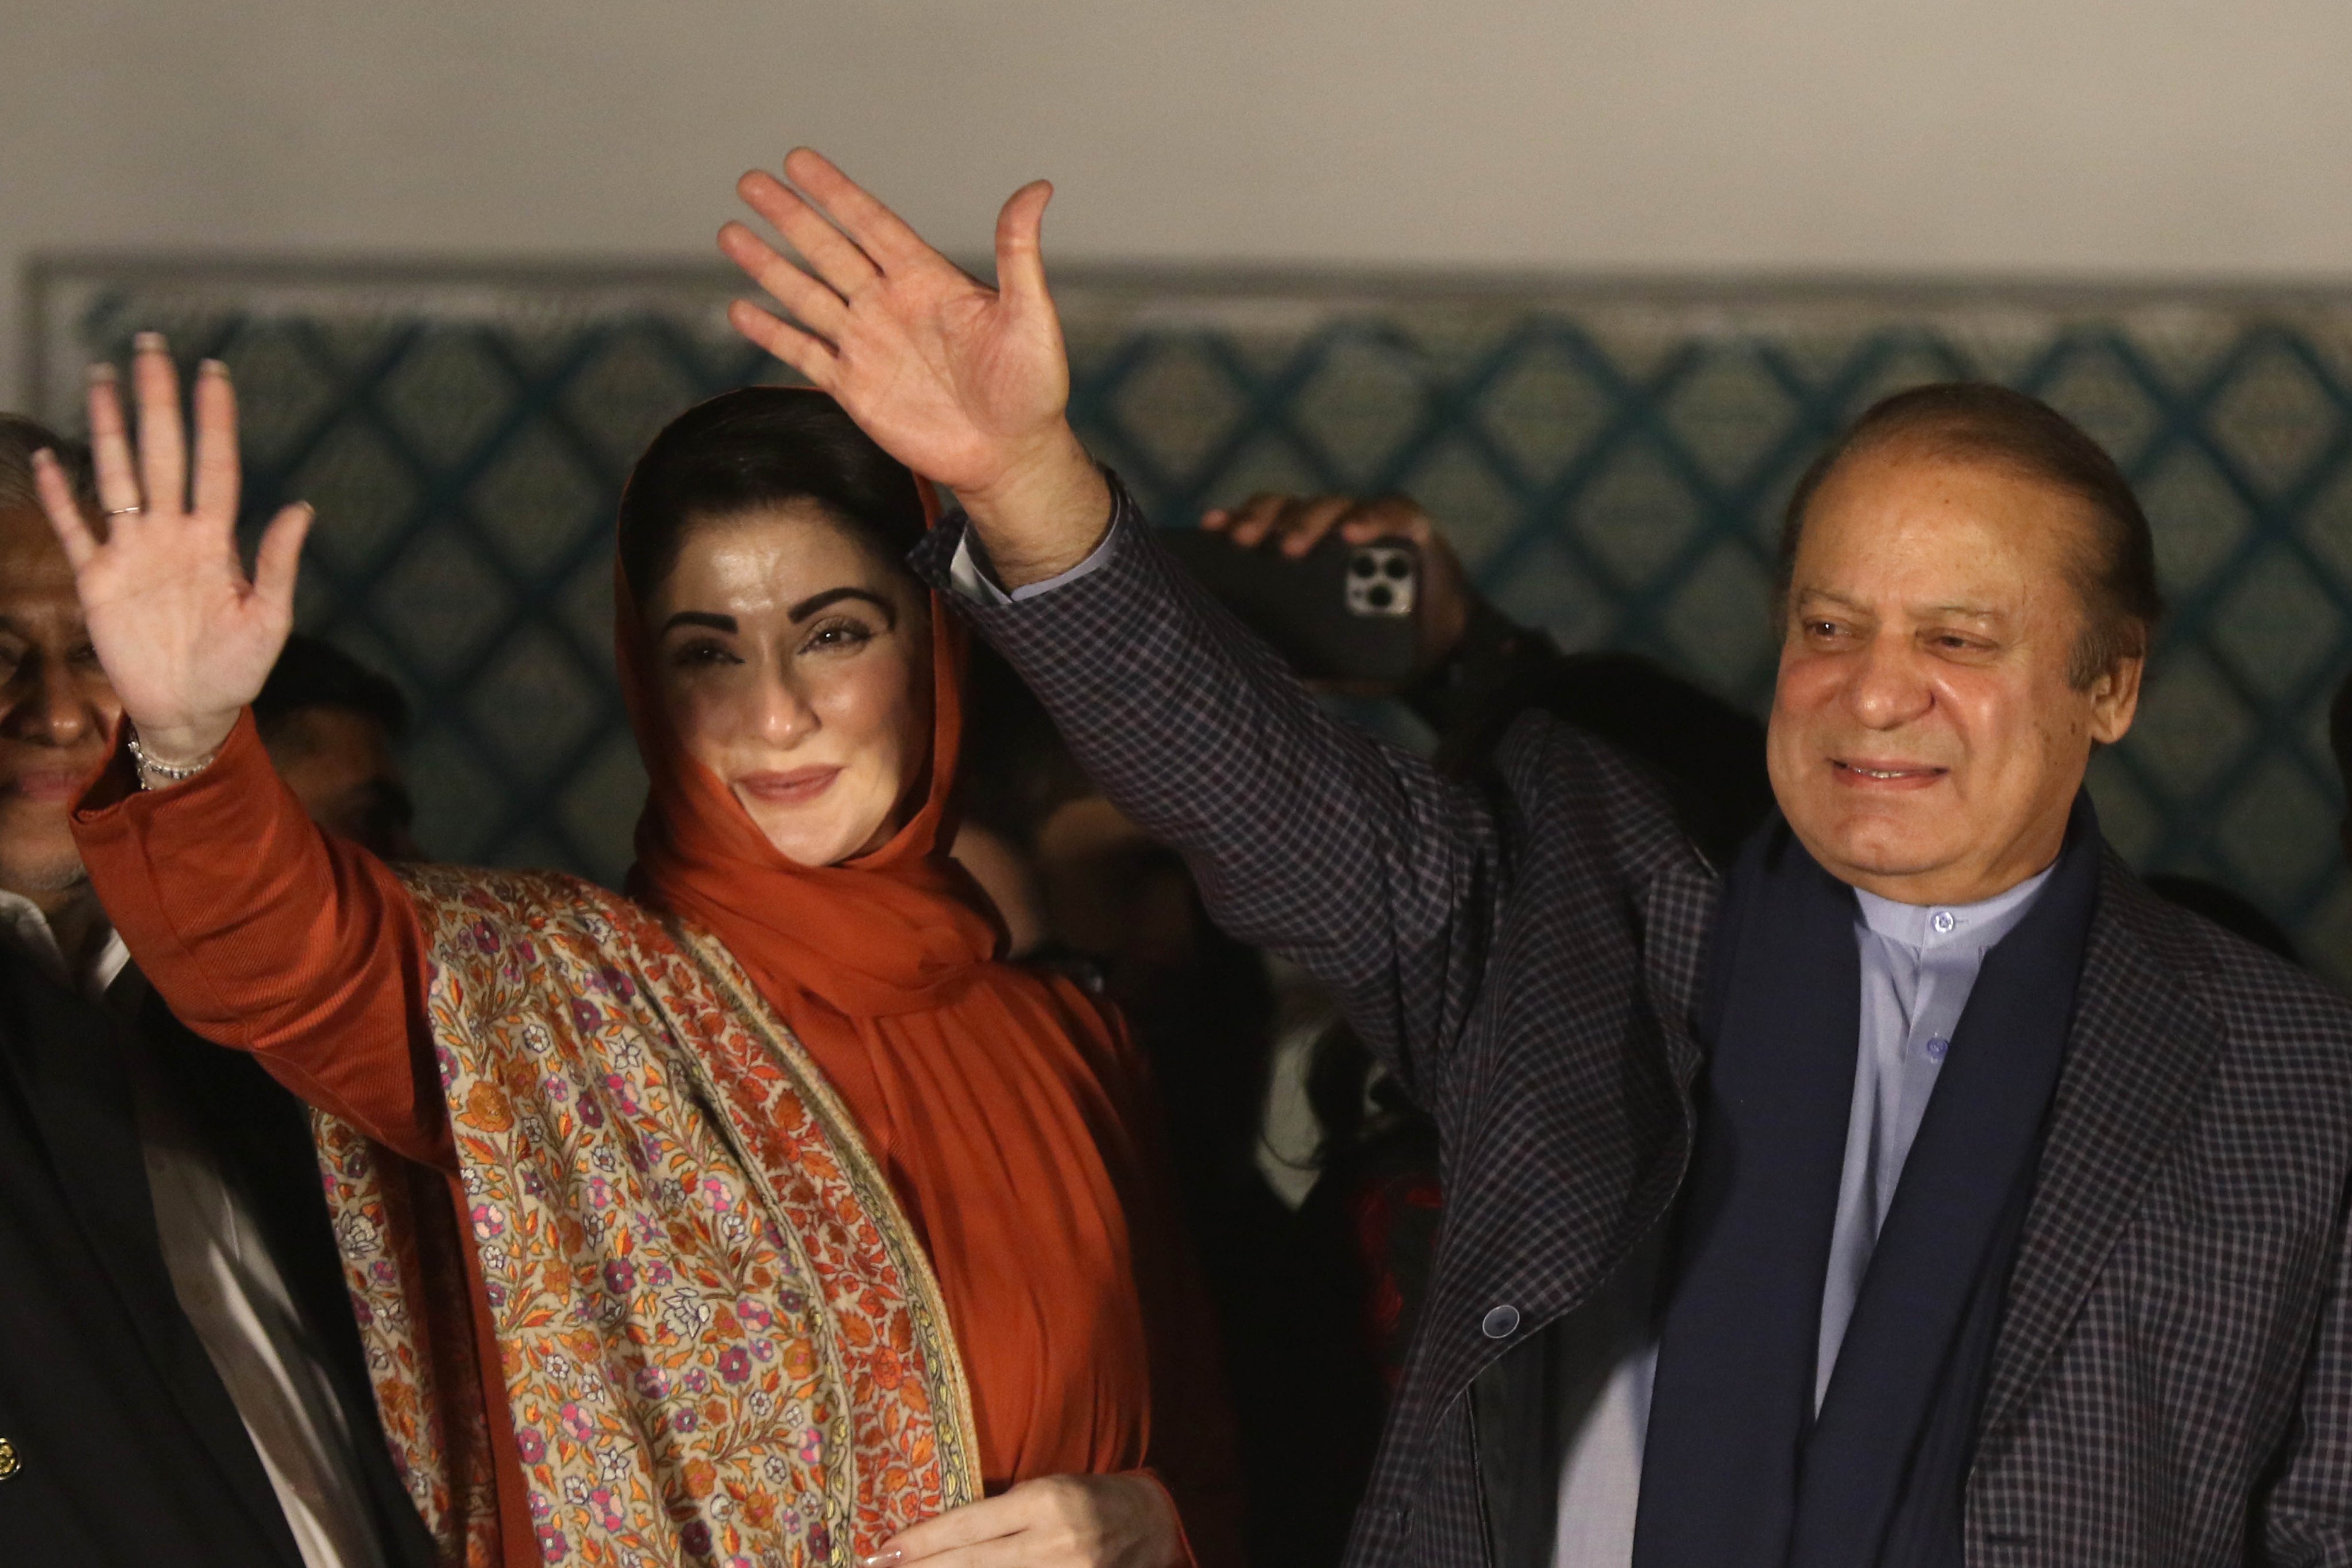 Nawaz Sharif (right), former prime minister and leader of the Pakistan Muslim League Nawaz, and his daughter Maryam Nawaz wave to supporters in Lahore. Maryam was elected chief minister in her family’s long-time power base of Punjab province. Photo: EPA-EFE